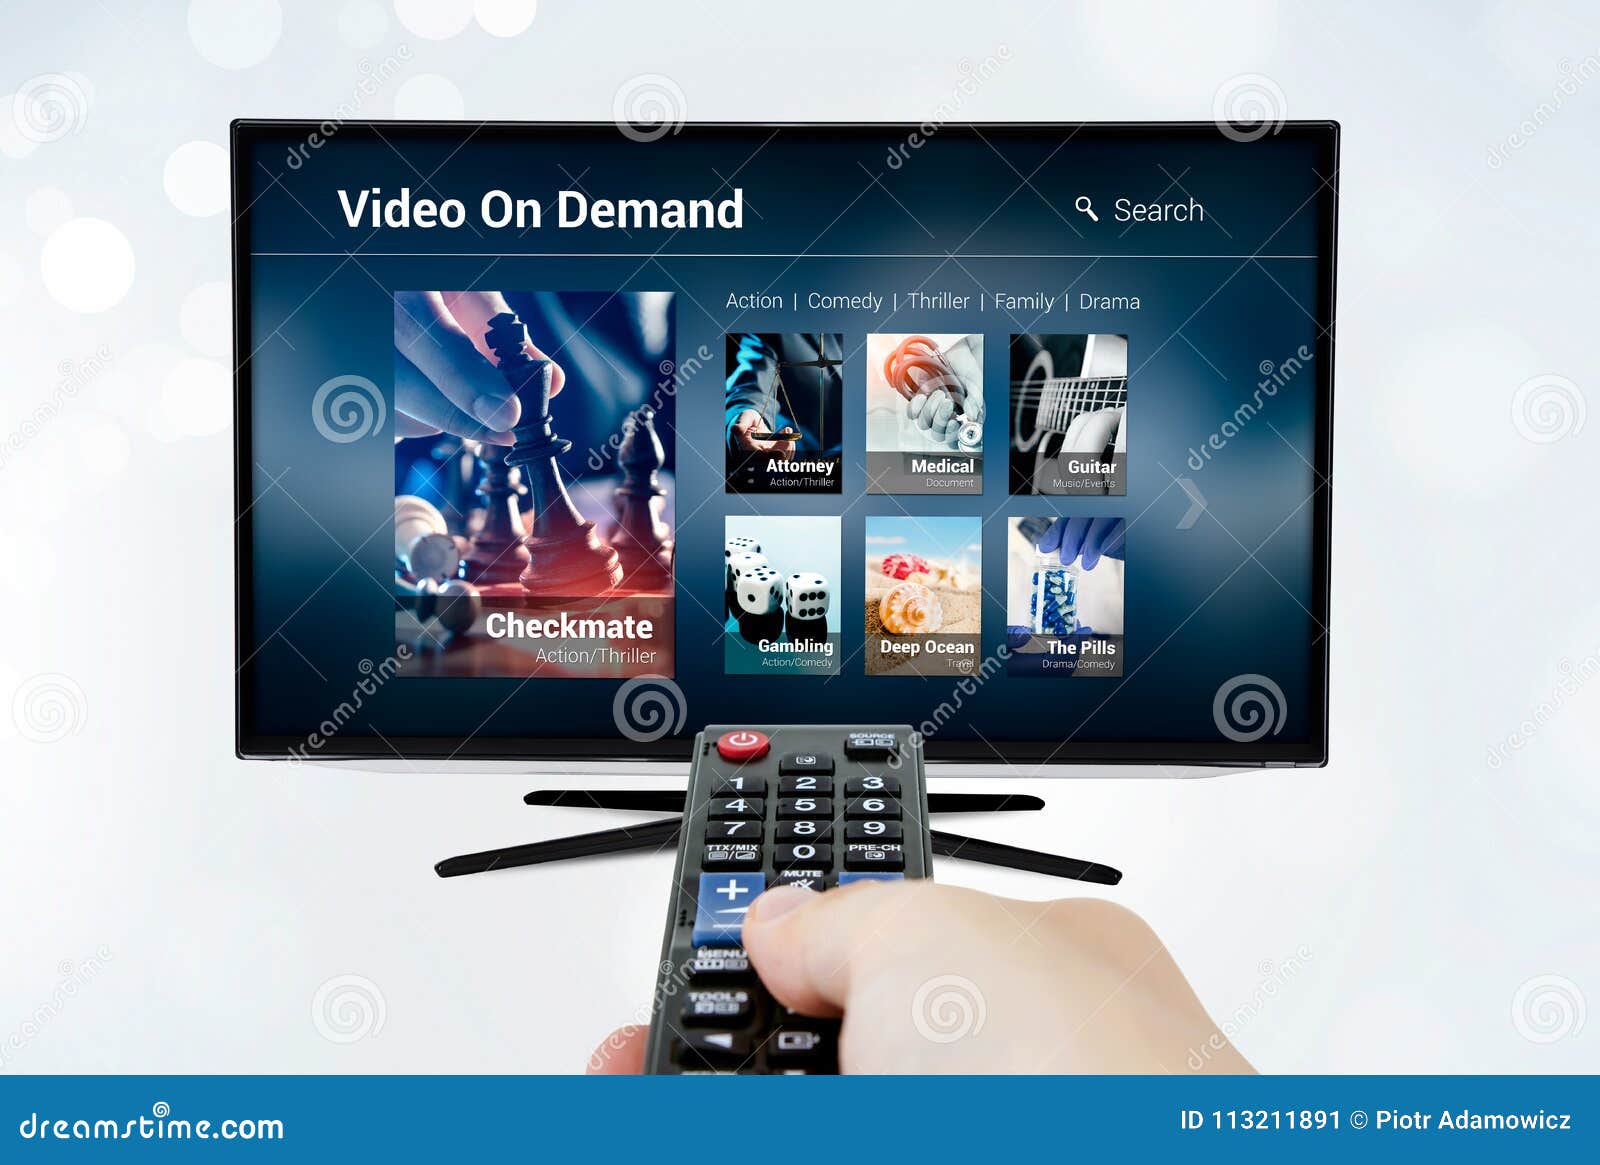 Video on Demand VOD Application or Service on Smart TV Stock Image